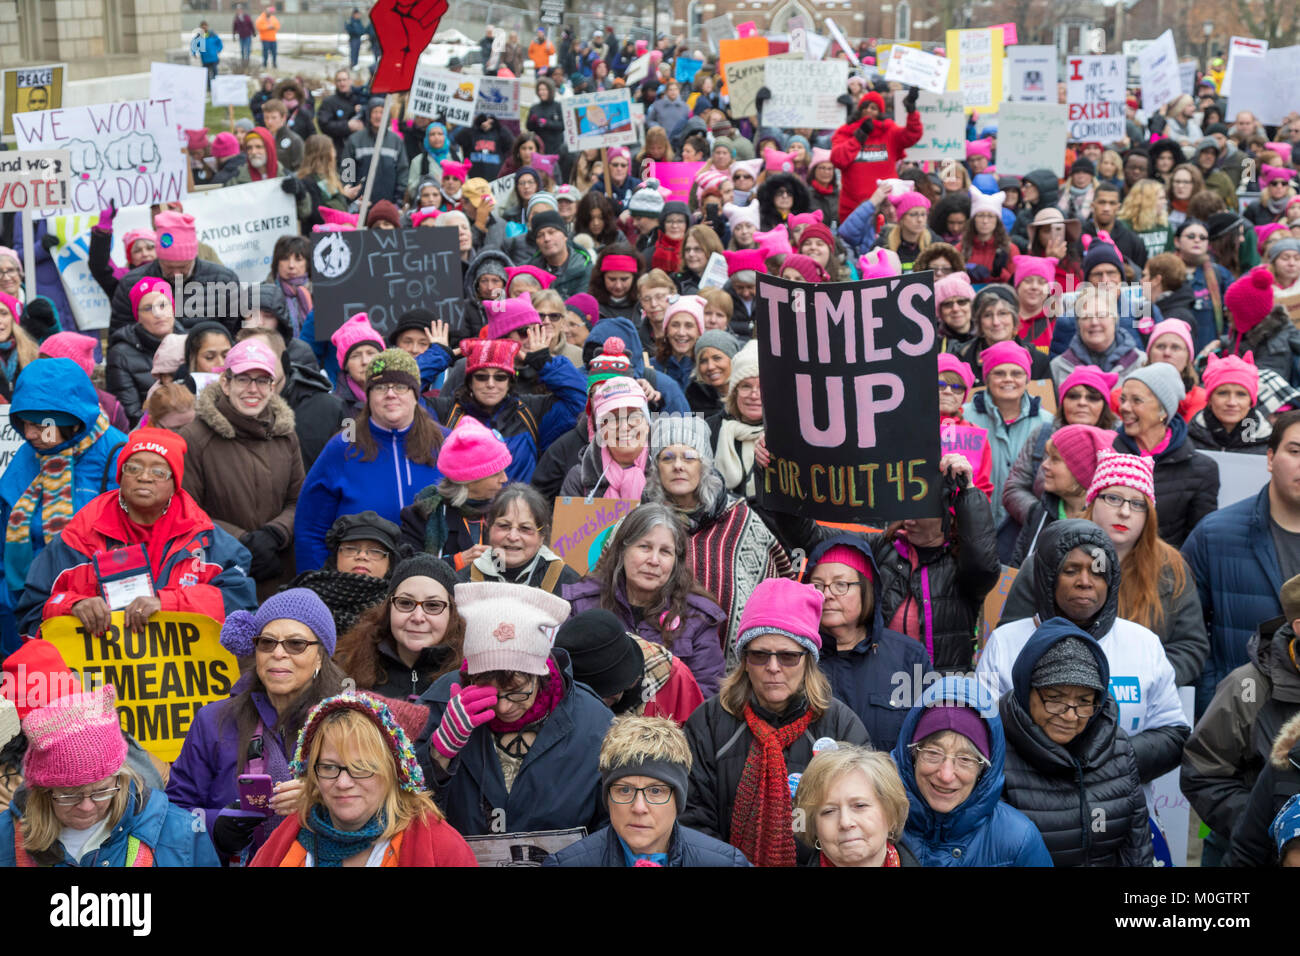 Lansing, Michigan USA - 21 January 2018 - On the first anniversary of the Women's March in Washington which protested the inauguration of President Donald Trump, women marched in cities across the country encouraging women to vote for alternatives in the 2018 mid-term elections. About 5,000 rallied at the Michigan state capitol. Credit: Jim West/Alamy Live News Stock Photo